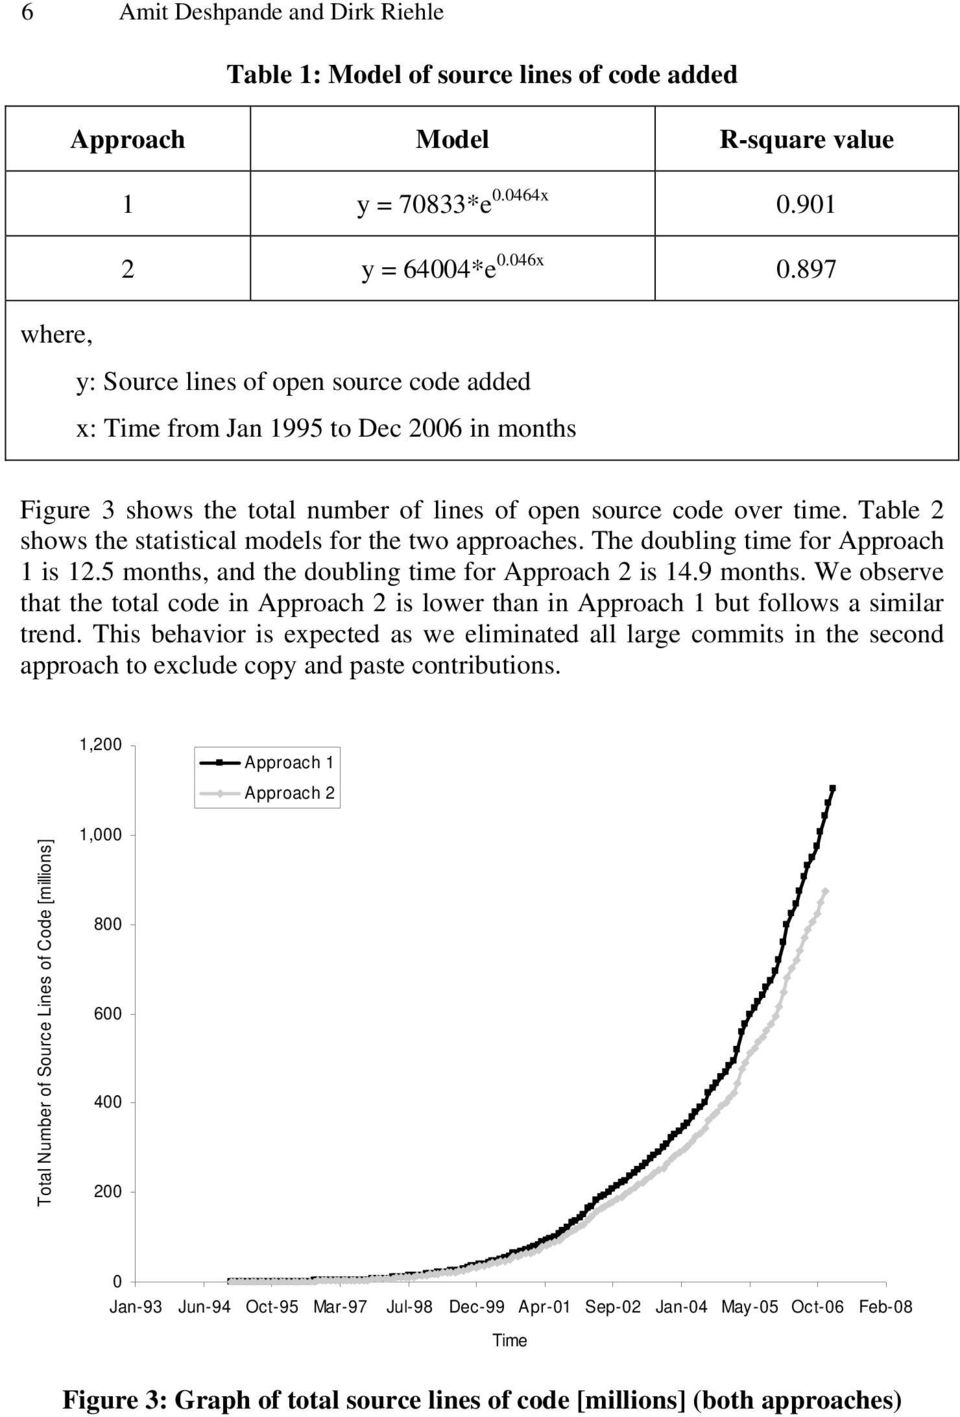 Table 2 shows the statistical models for the two approaches. The doubling time for Approach 1 is 12.5 months, and the doubling time for Approach 2 is 14.9 months.